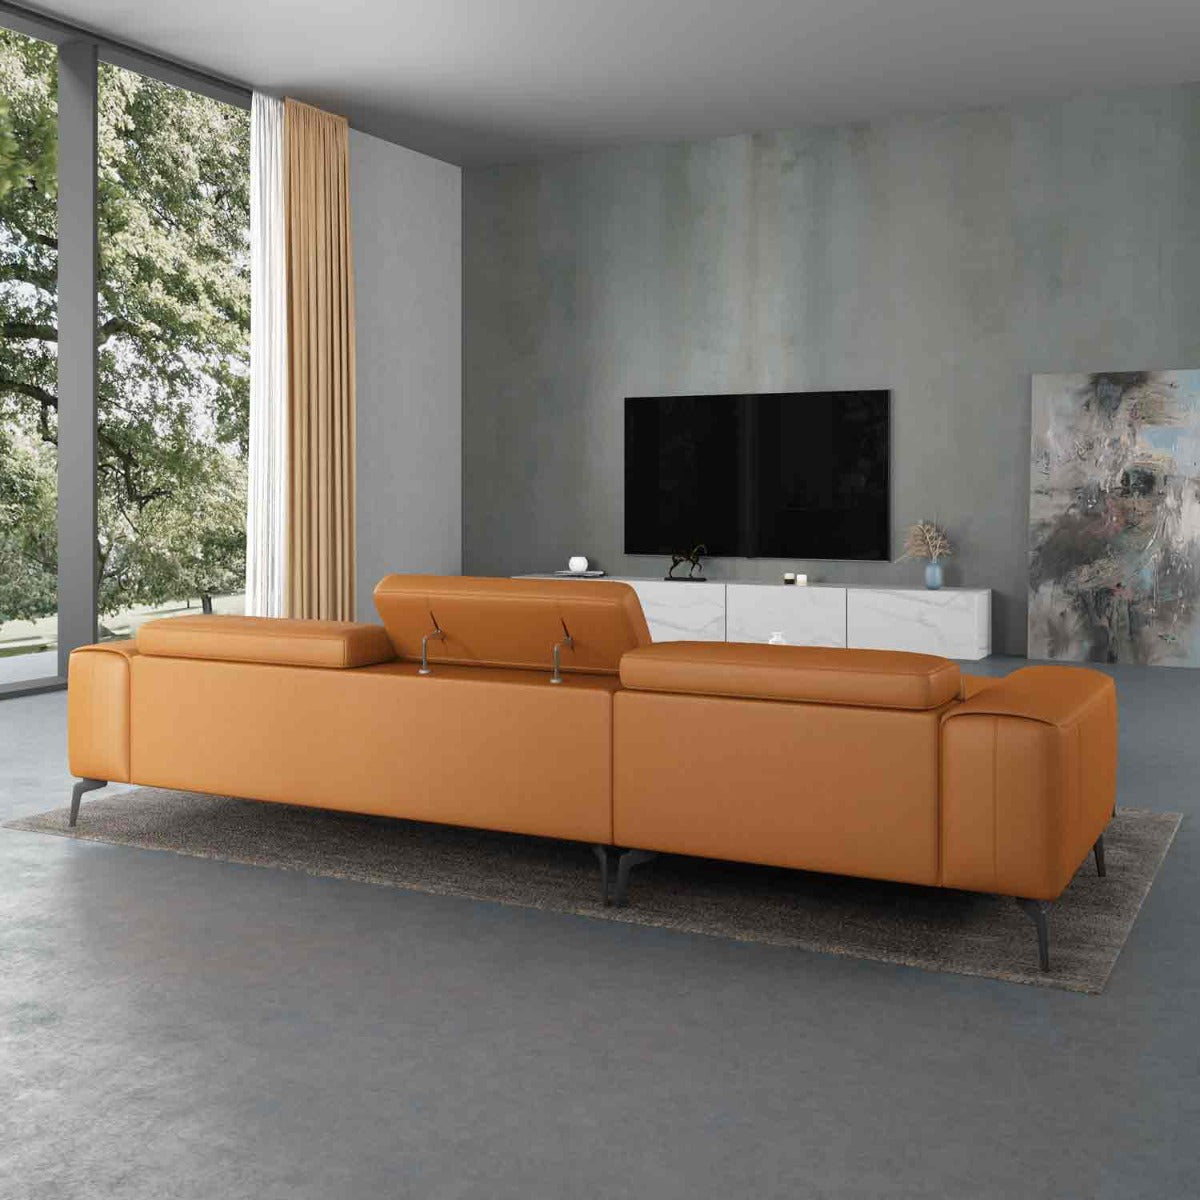 European Furniture - Cavour Left Hand Facing Sectional In Cognac - 12556L-3LHF - New Star Living